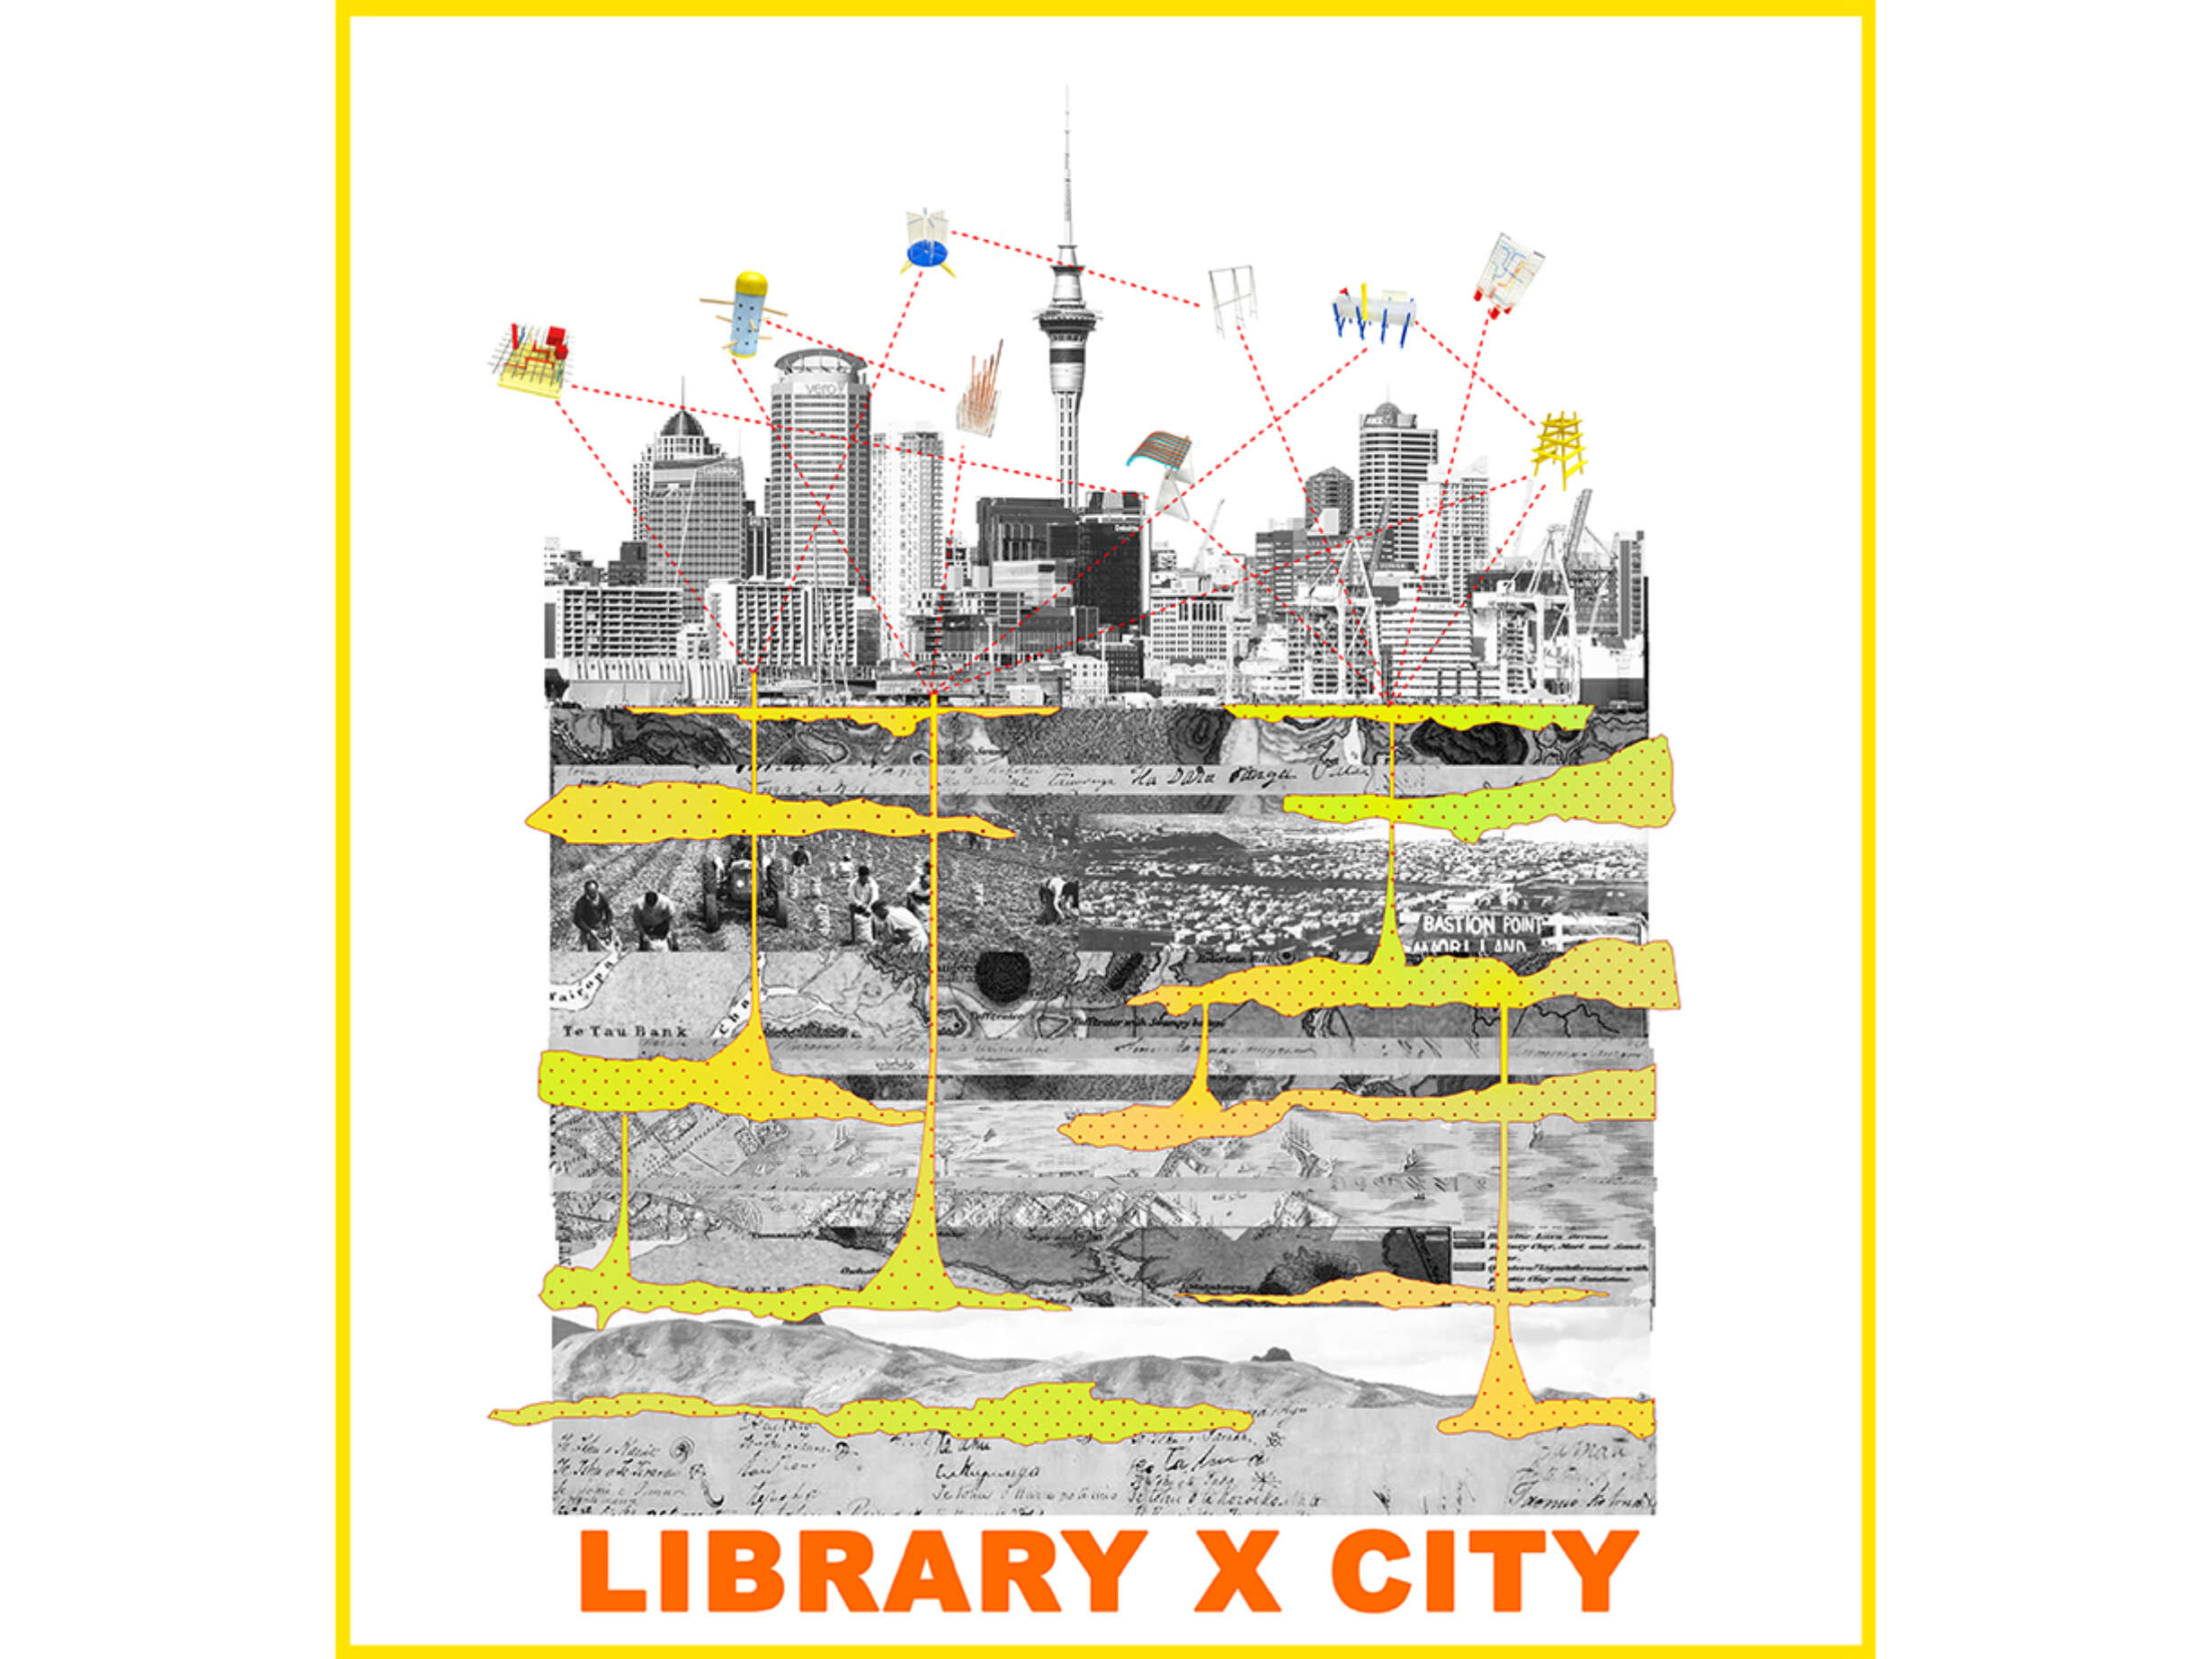 Library x City, collage